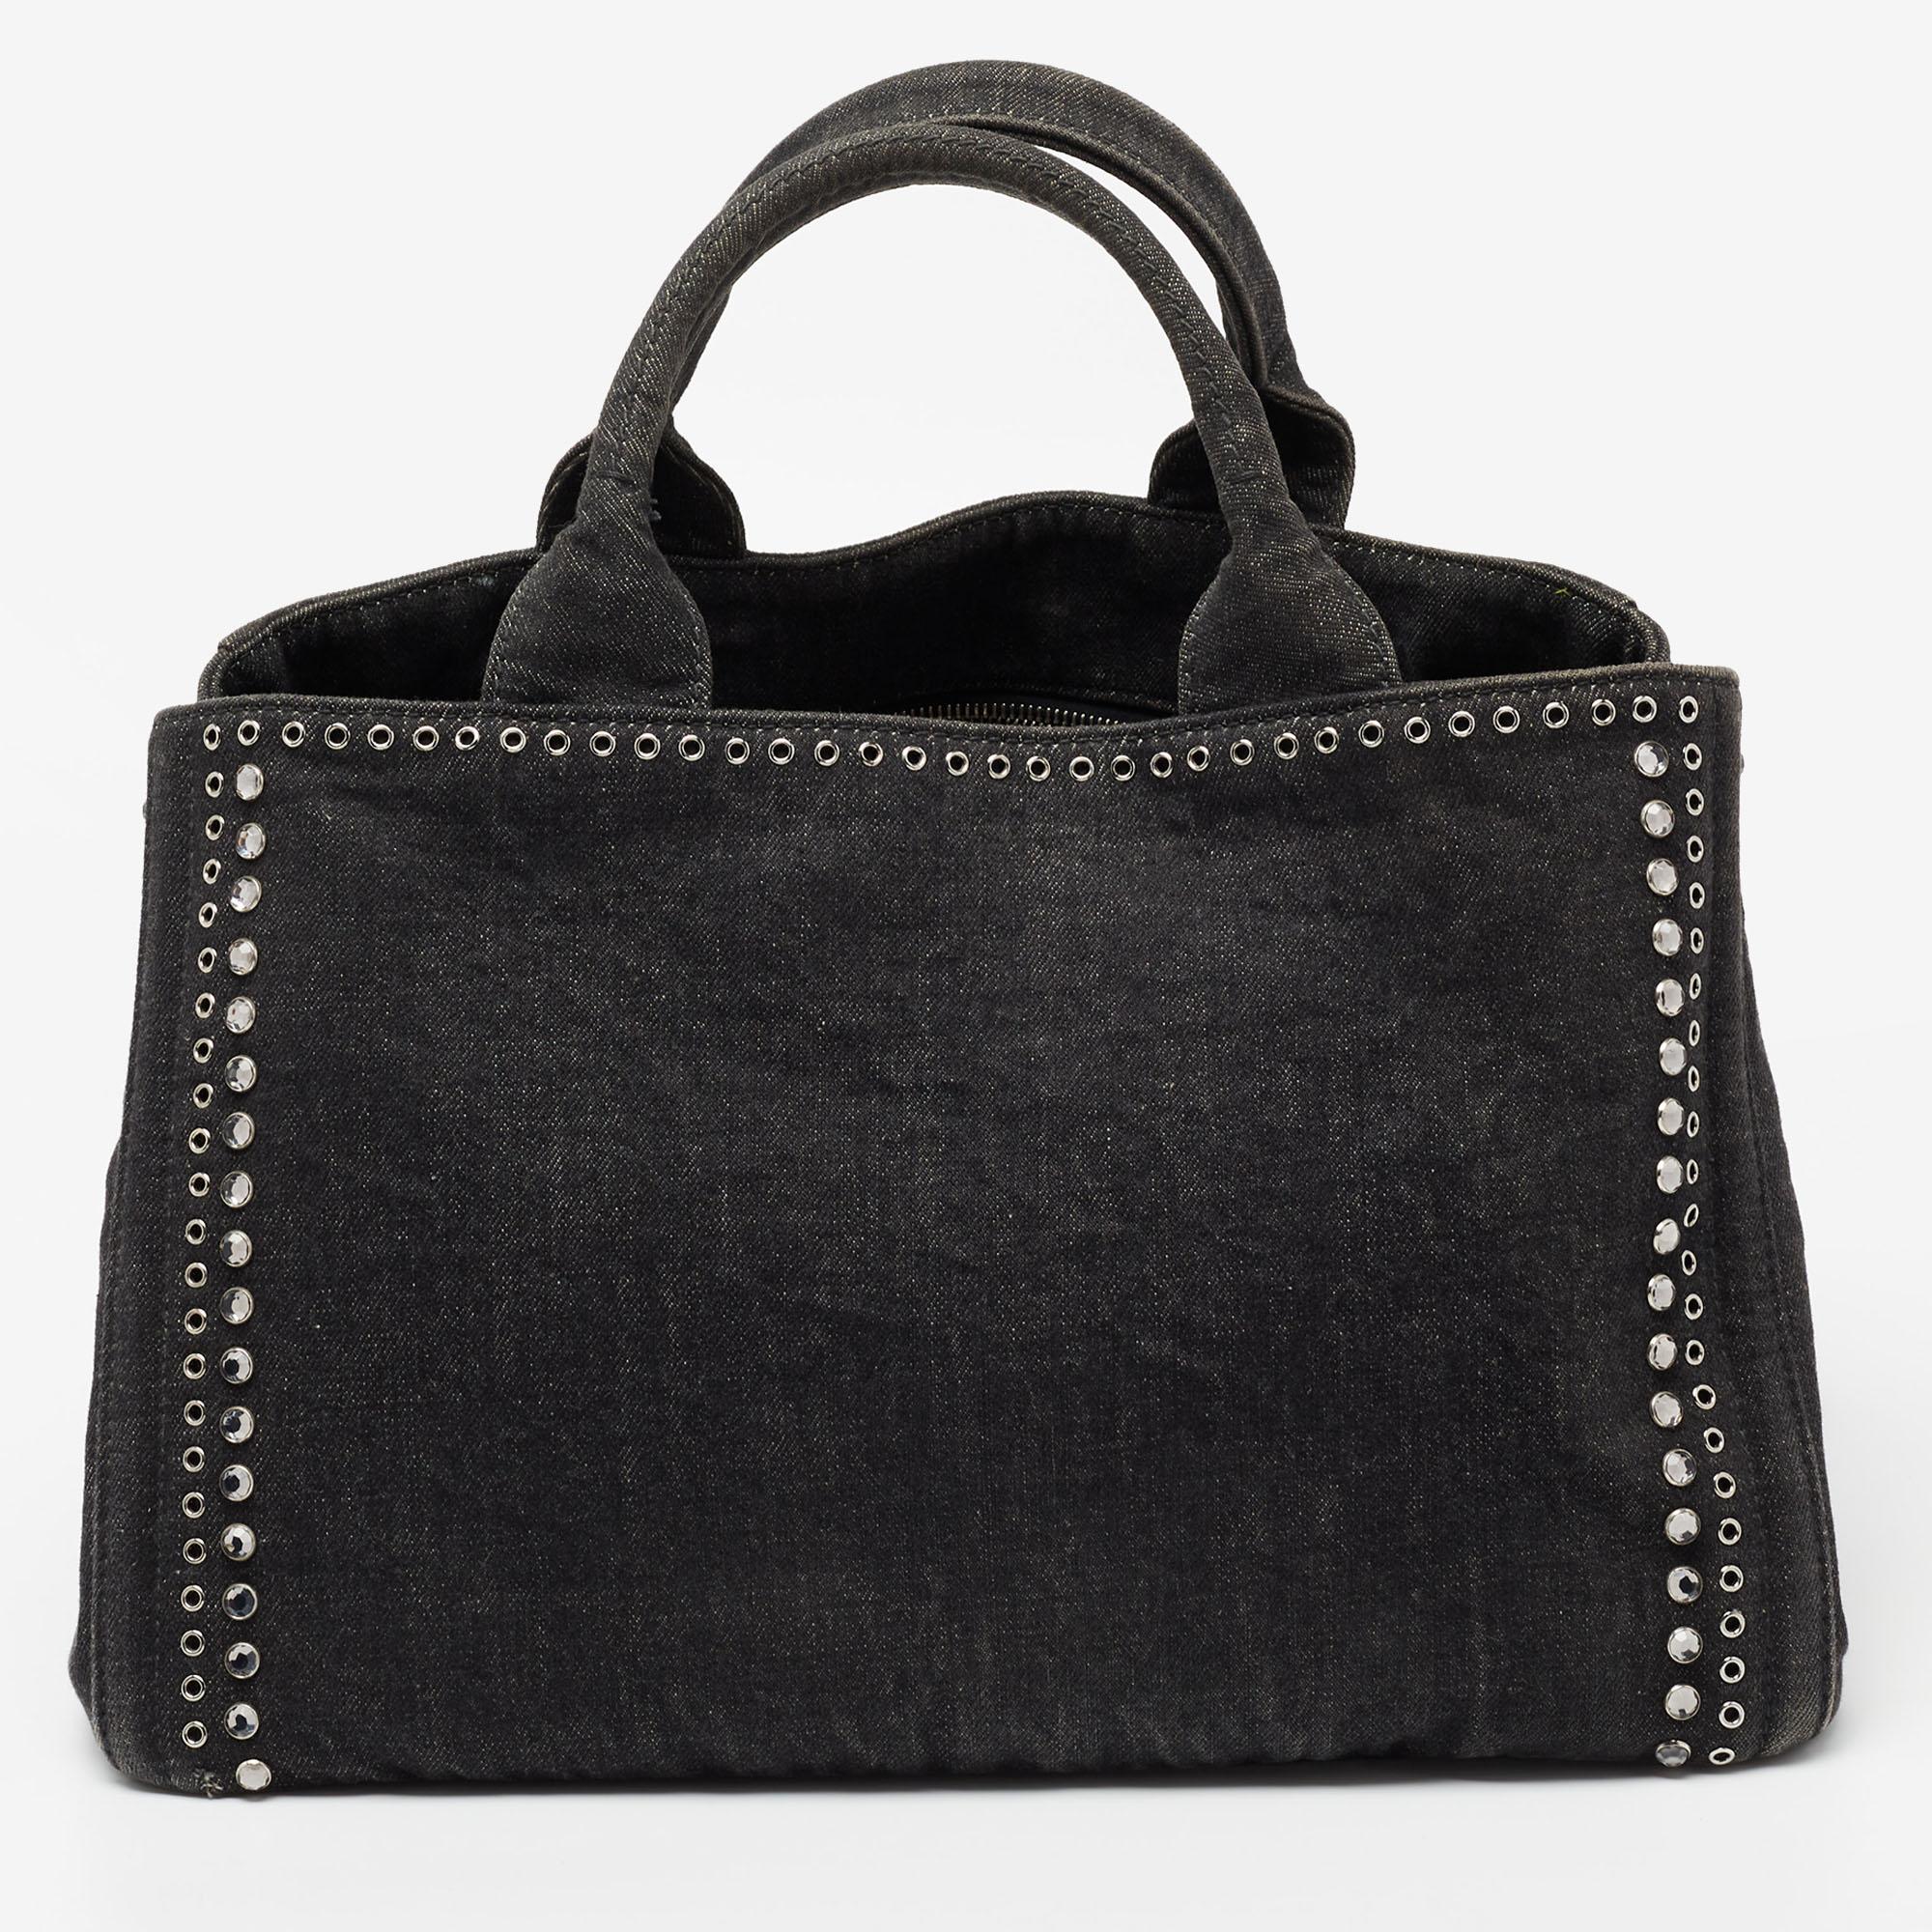 Coming from Prada is this black tote that is the perfect evening bag. It is crafted from denim into a structured shape and flaunts silver-tone hardware, crystal studs, dual handles, and a capacious interior for your belongings. The tote will look